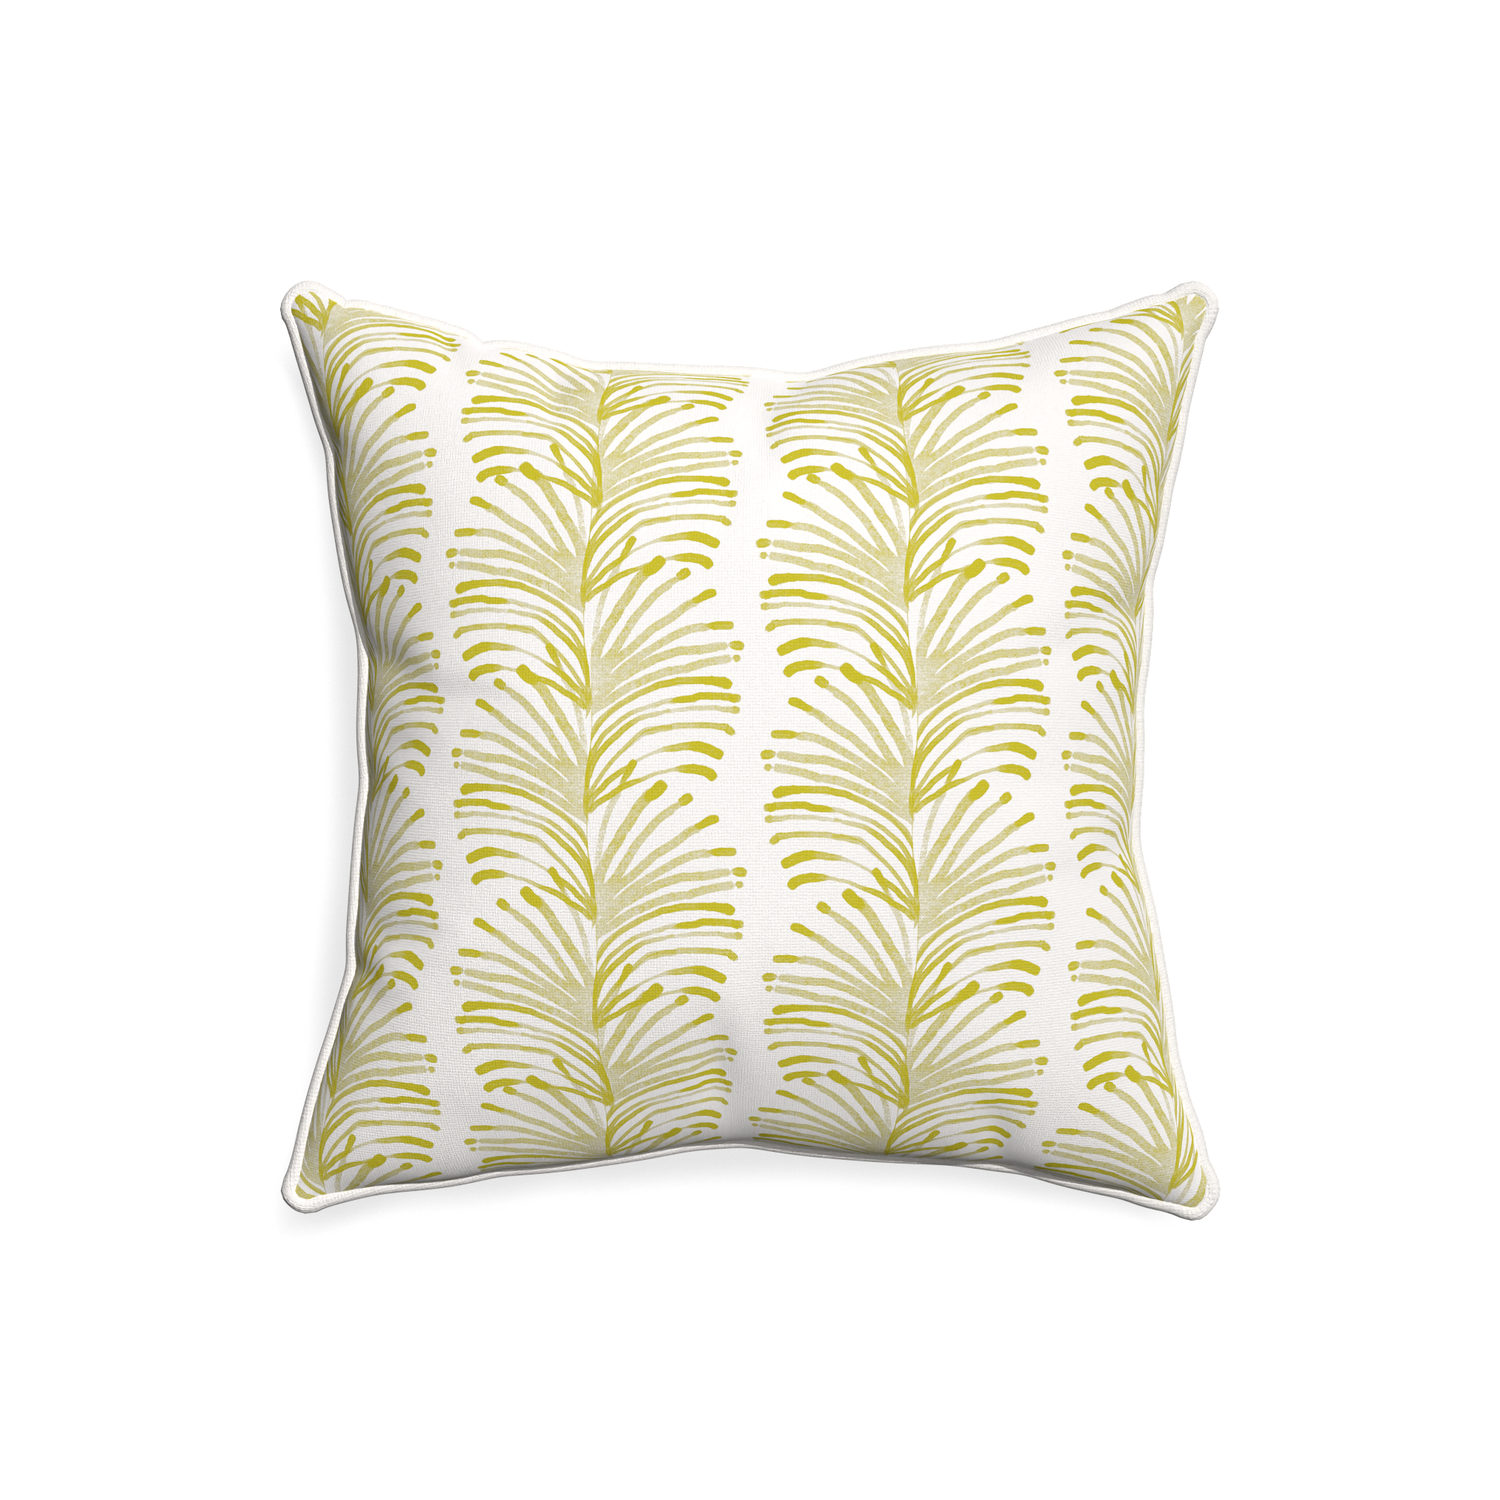 20-square emma chartreuse custom pillow with snow piping on white background